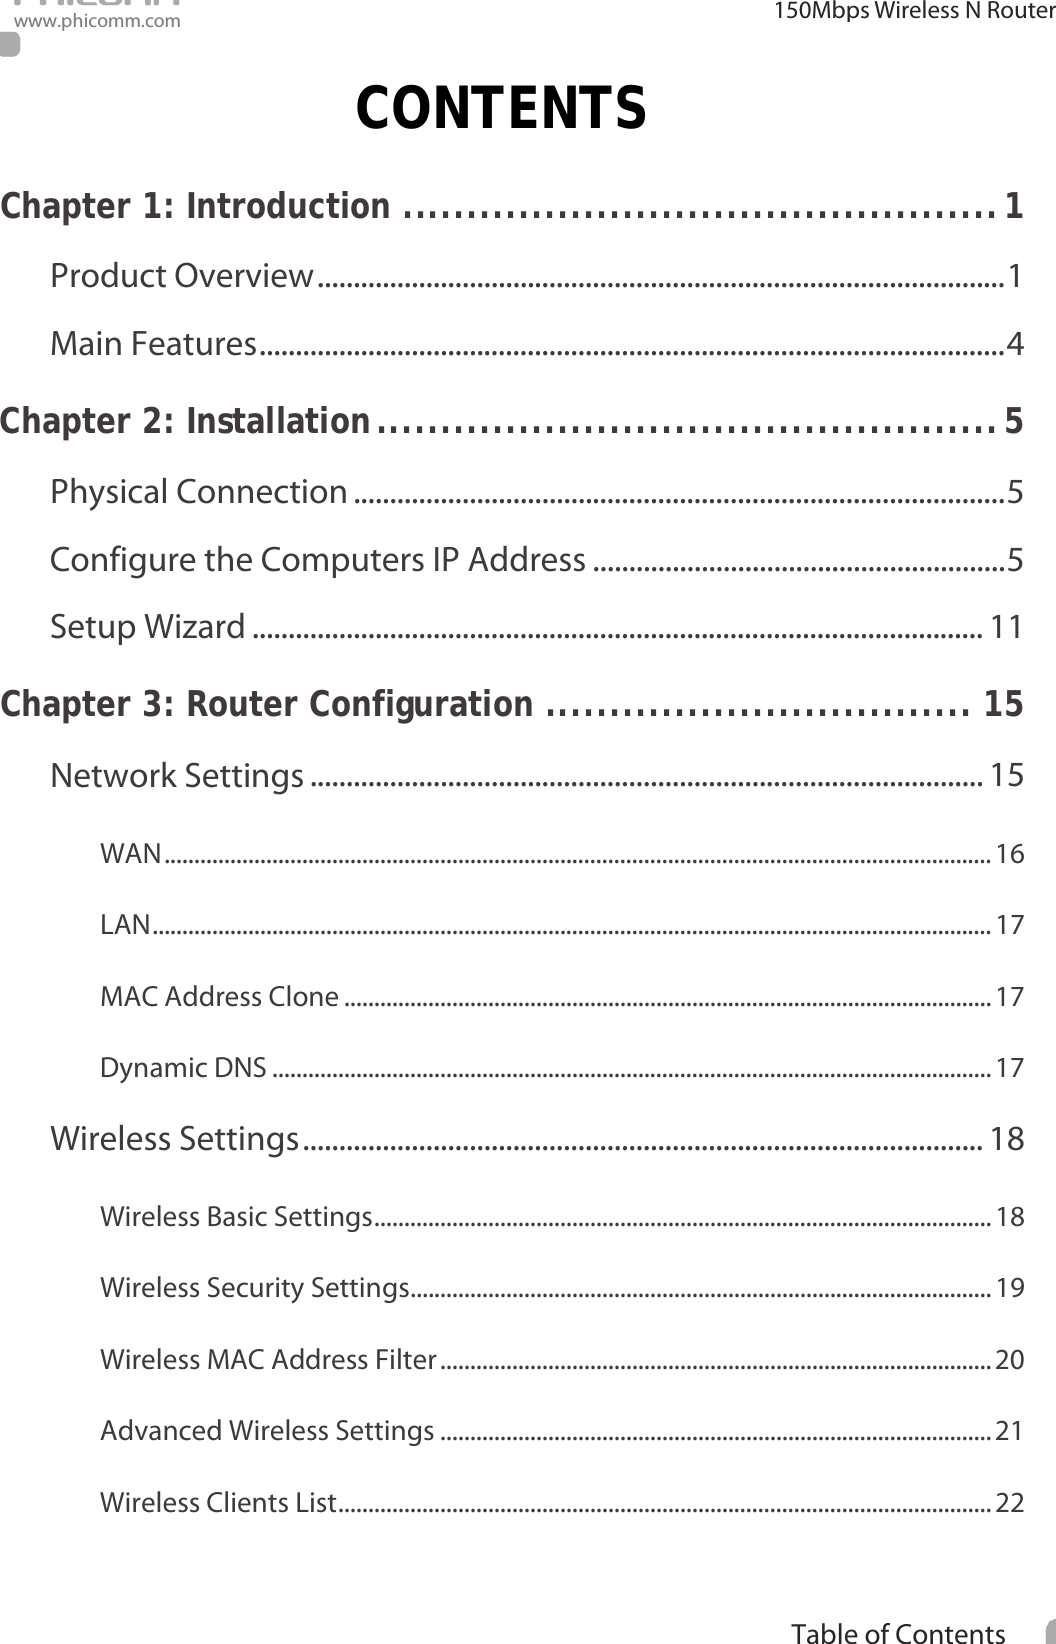                                                            i Table of Contents  150Mbps Wireless N Router www.phicomm.com CONTENTS Chapter 1: Introduction   .............................................. 1Product Overview   ............................................................................................... 1Main Features   ....................................................................................................... 4Chapter 2: Installation   ................................................ 5Physical Connection   .......................................................................................... 5Configure the Computers IP Address   ......................................................... 5Setup Wizard   ..................................................................................................... 11Chapter 3: Router Configuration   ................................. 15Network Settings   ............................................................................................. 15WAN   .......................................................................................................................................... 16LAN   ............................................................................................................................................ 17MAC Address Clone   ............................................................................................................ 17Dynamic DNS   ........................................................................................................................ 17Wireless Settings   .............................................................................................. 18Wireless Basic Settings   ....................................................................................................... 18Wireless Security Settings   ................................................................................................. 19Wireless MAC Address Filter   ............................................................................................ 20Advanced Wireless Settings   ............................................................................................ 21Wireless Clients List   ............................................................................................................. 22